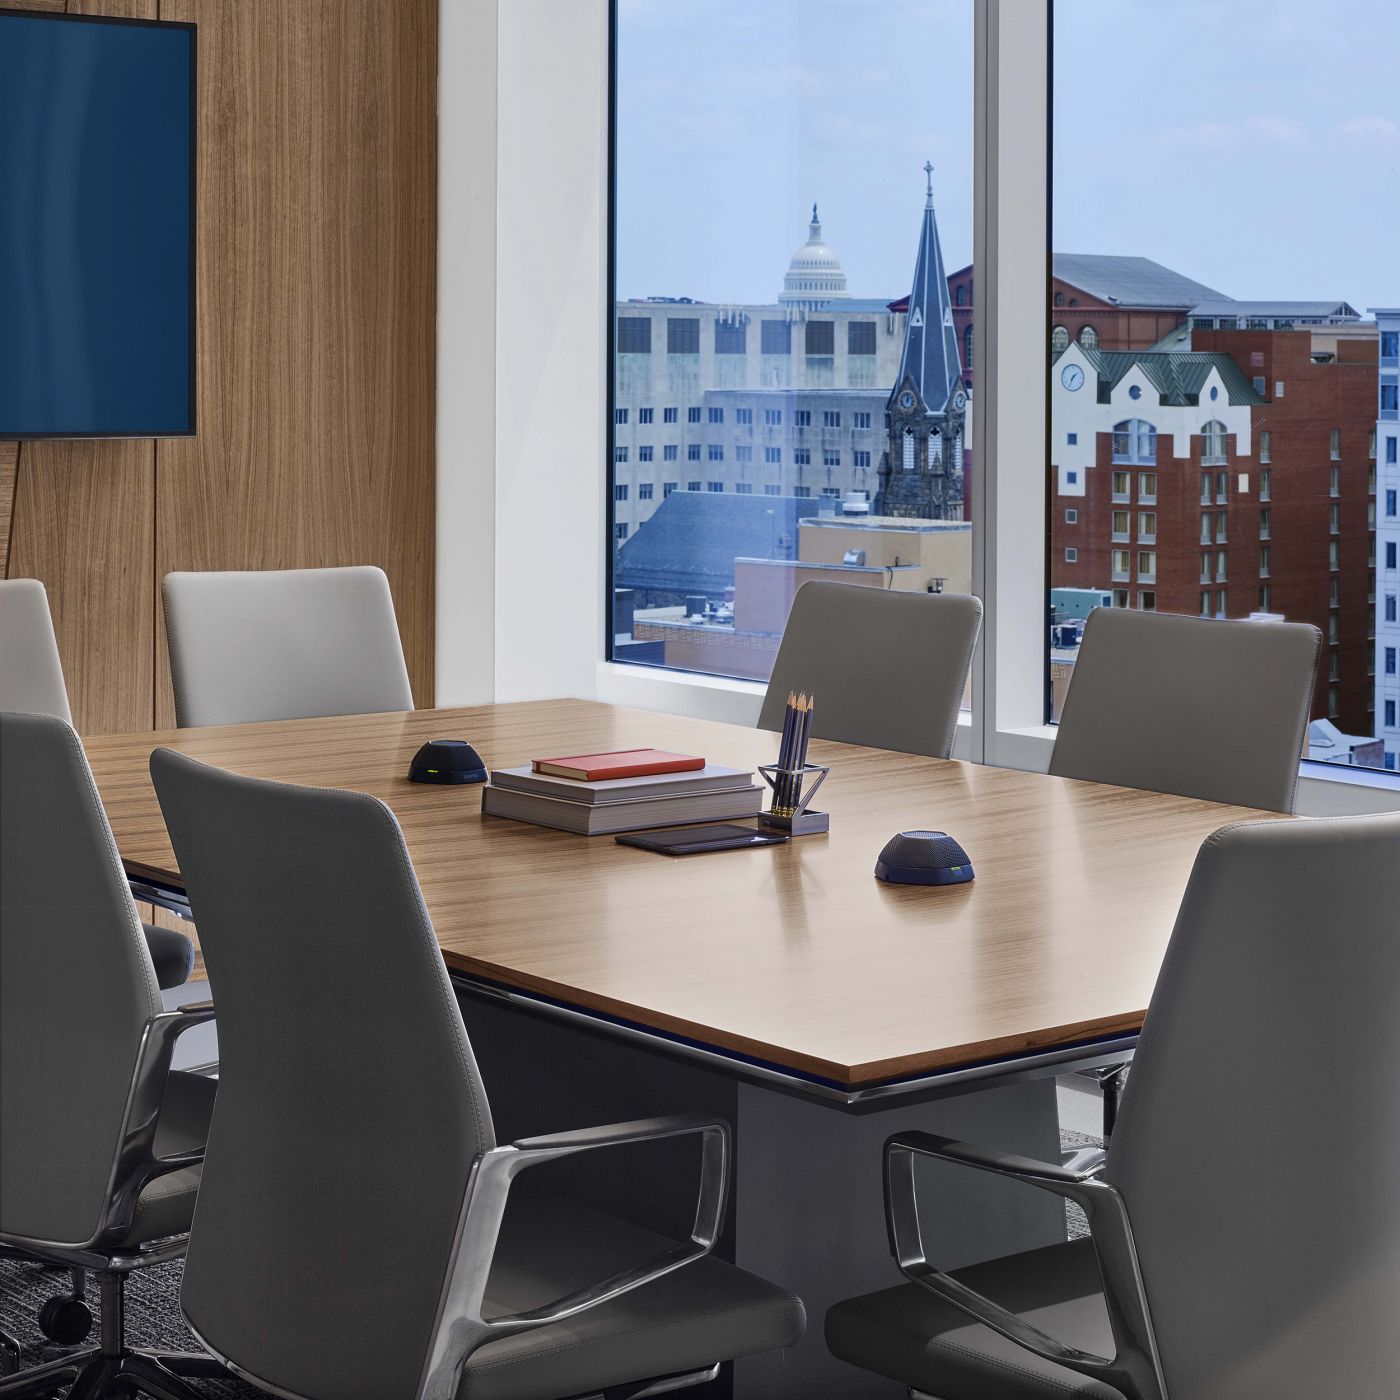 Venable features MESA conferencing in a variety of shapes and materials including this table in Polished Chrome and Paldao wood veneer